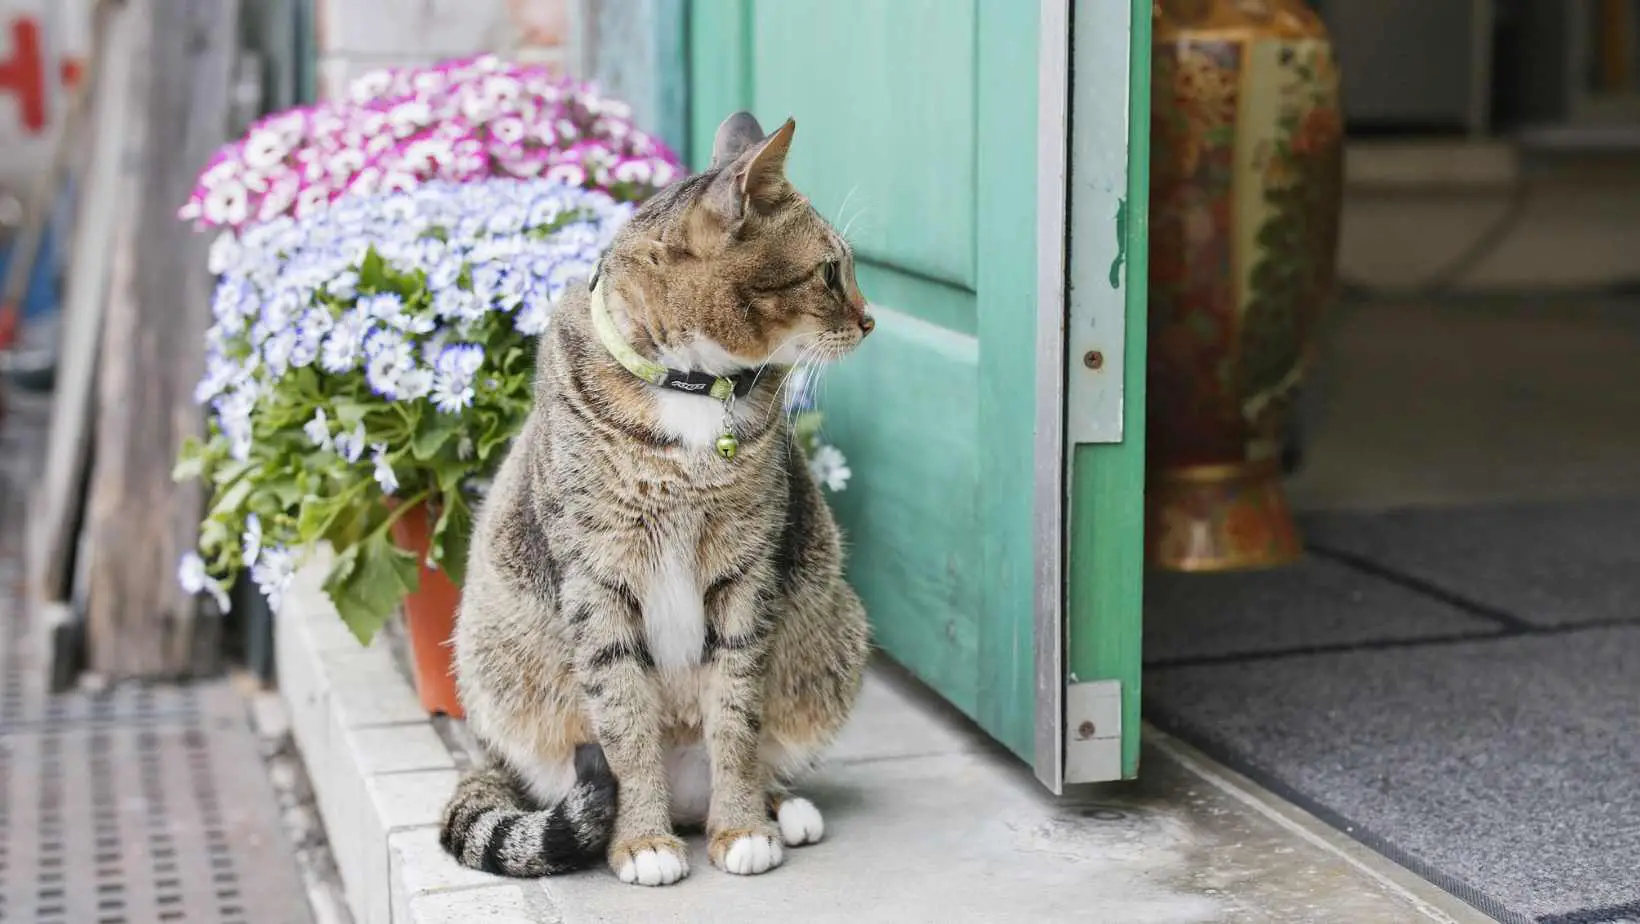 What does it mean when a cat shows up at your door spiritual meaning?